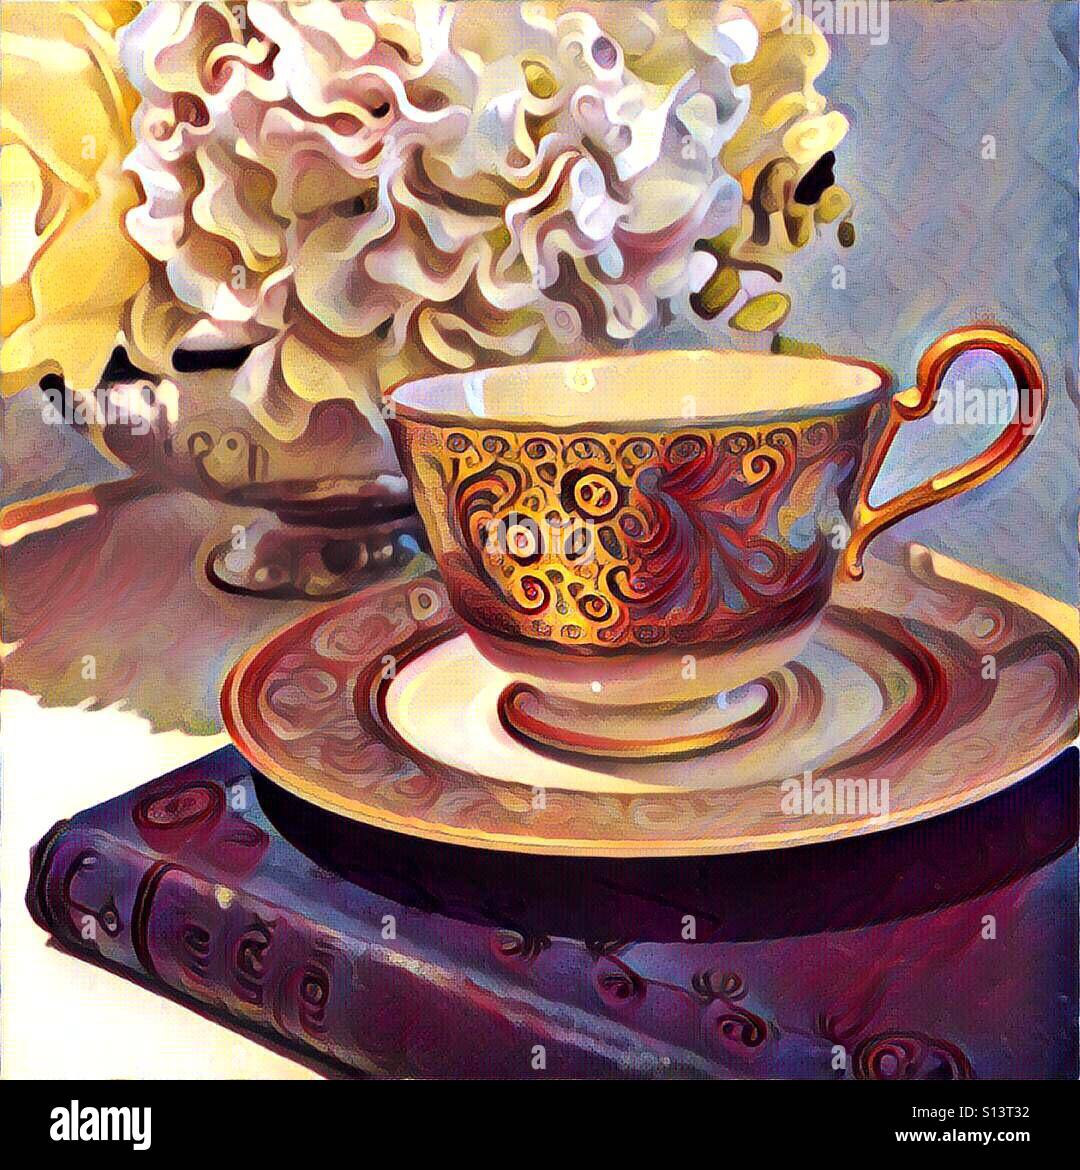 A digital painting of. Fancy tea cup on a saucer, atop a book and in front of a flower arrangement Stock Photo